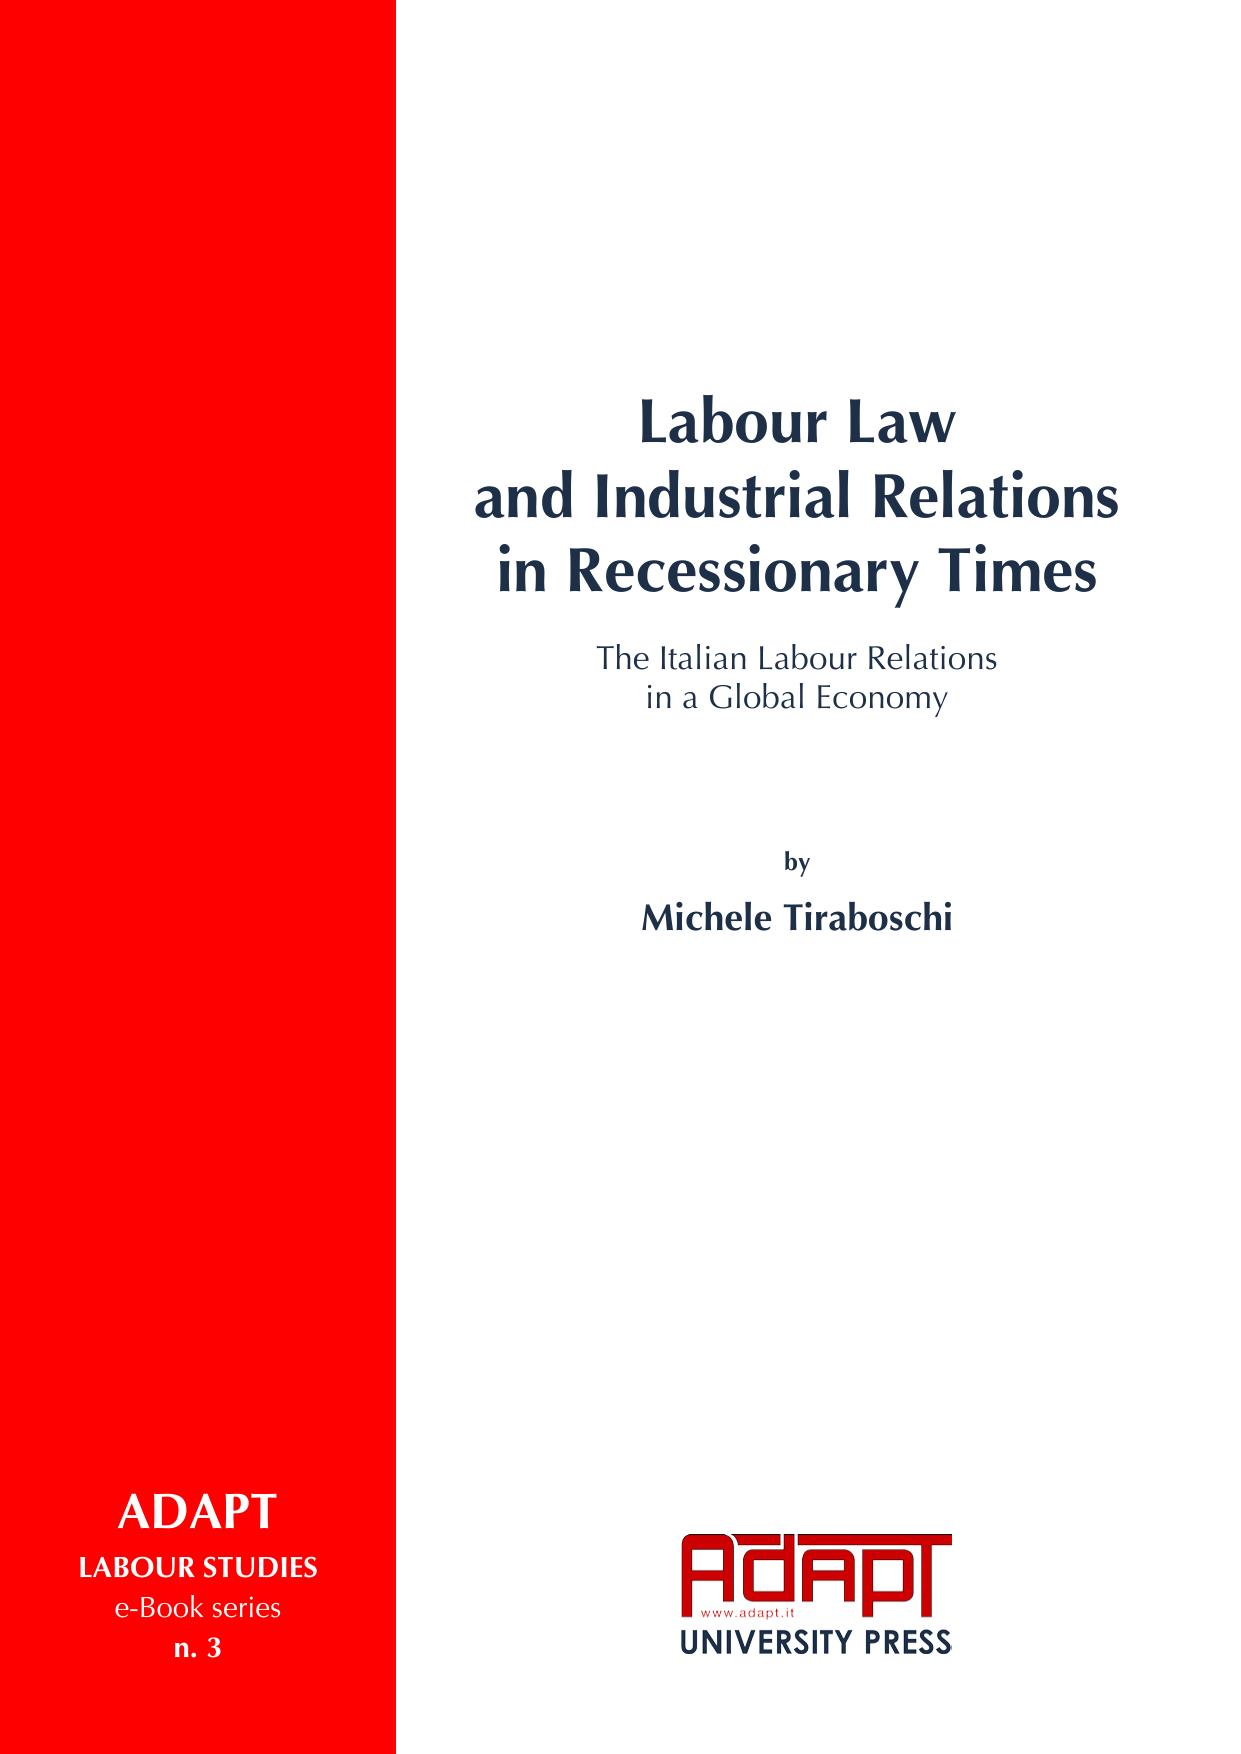 Labour Law and industrial relations in recessionary time 2012